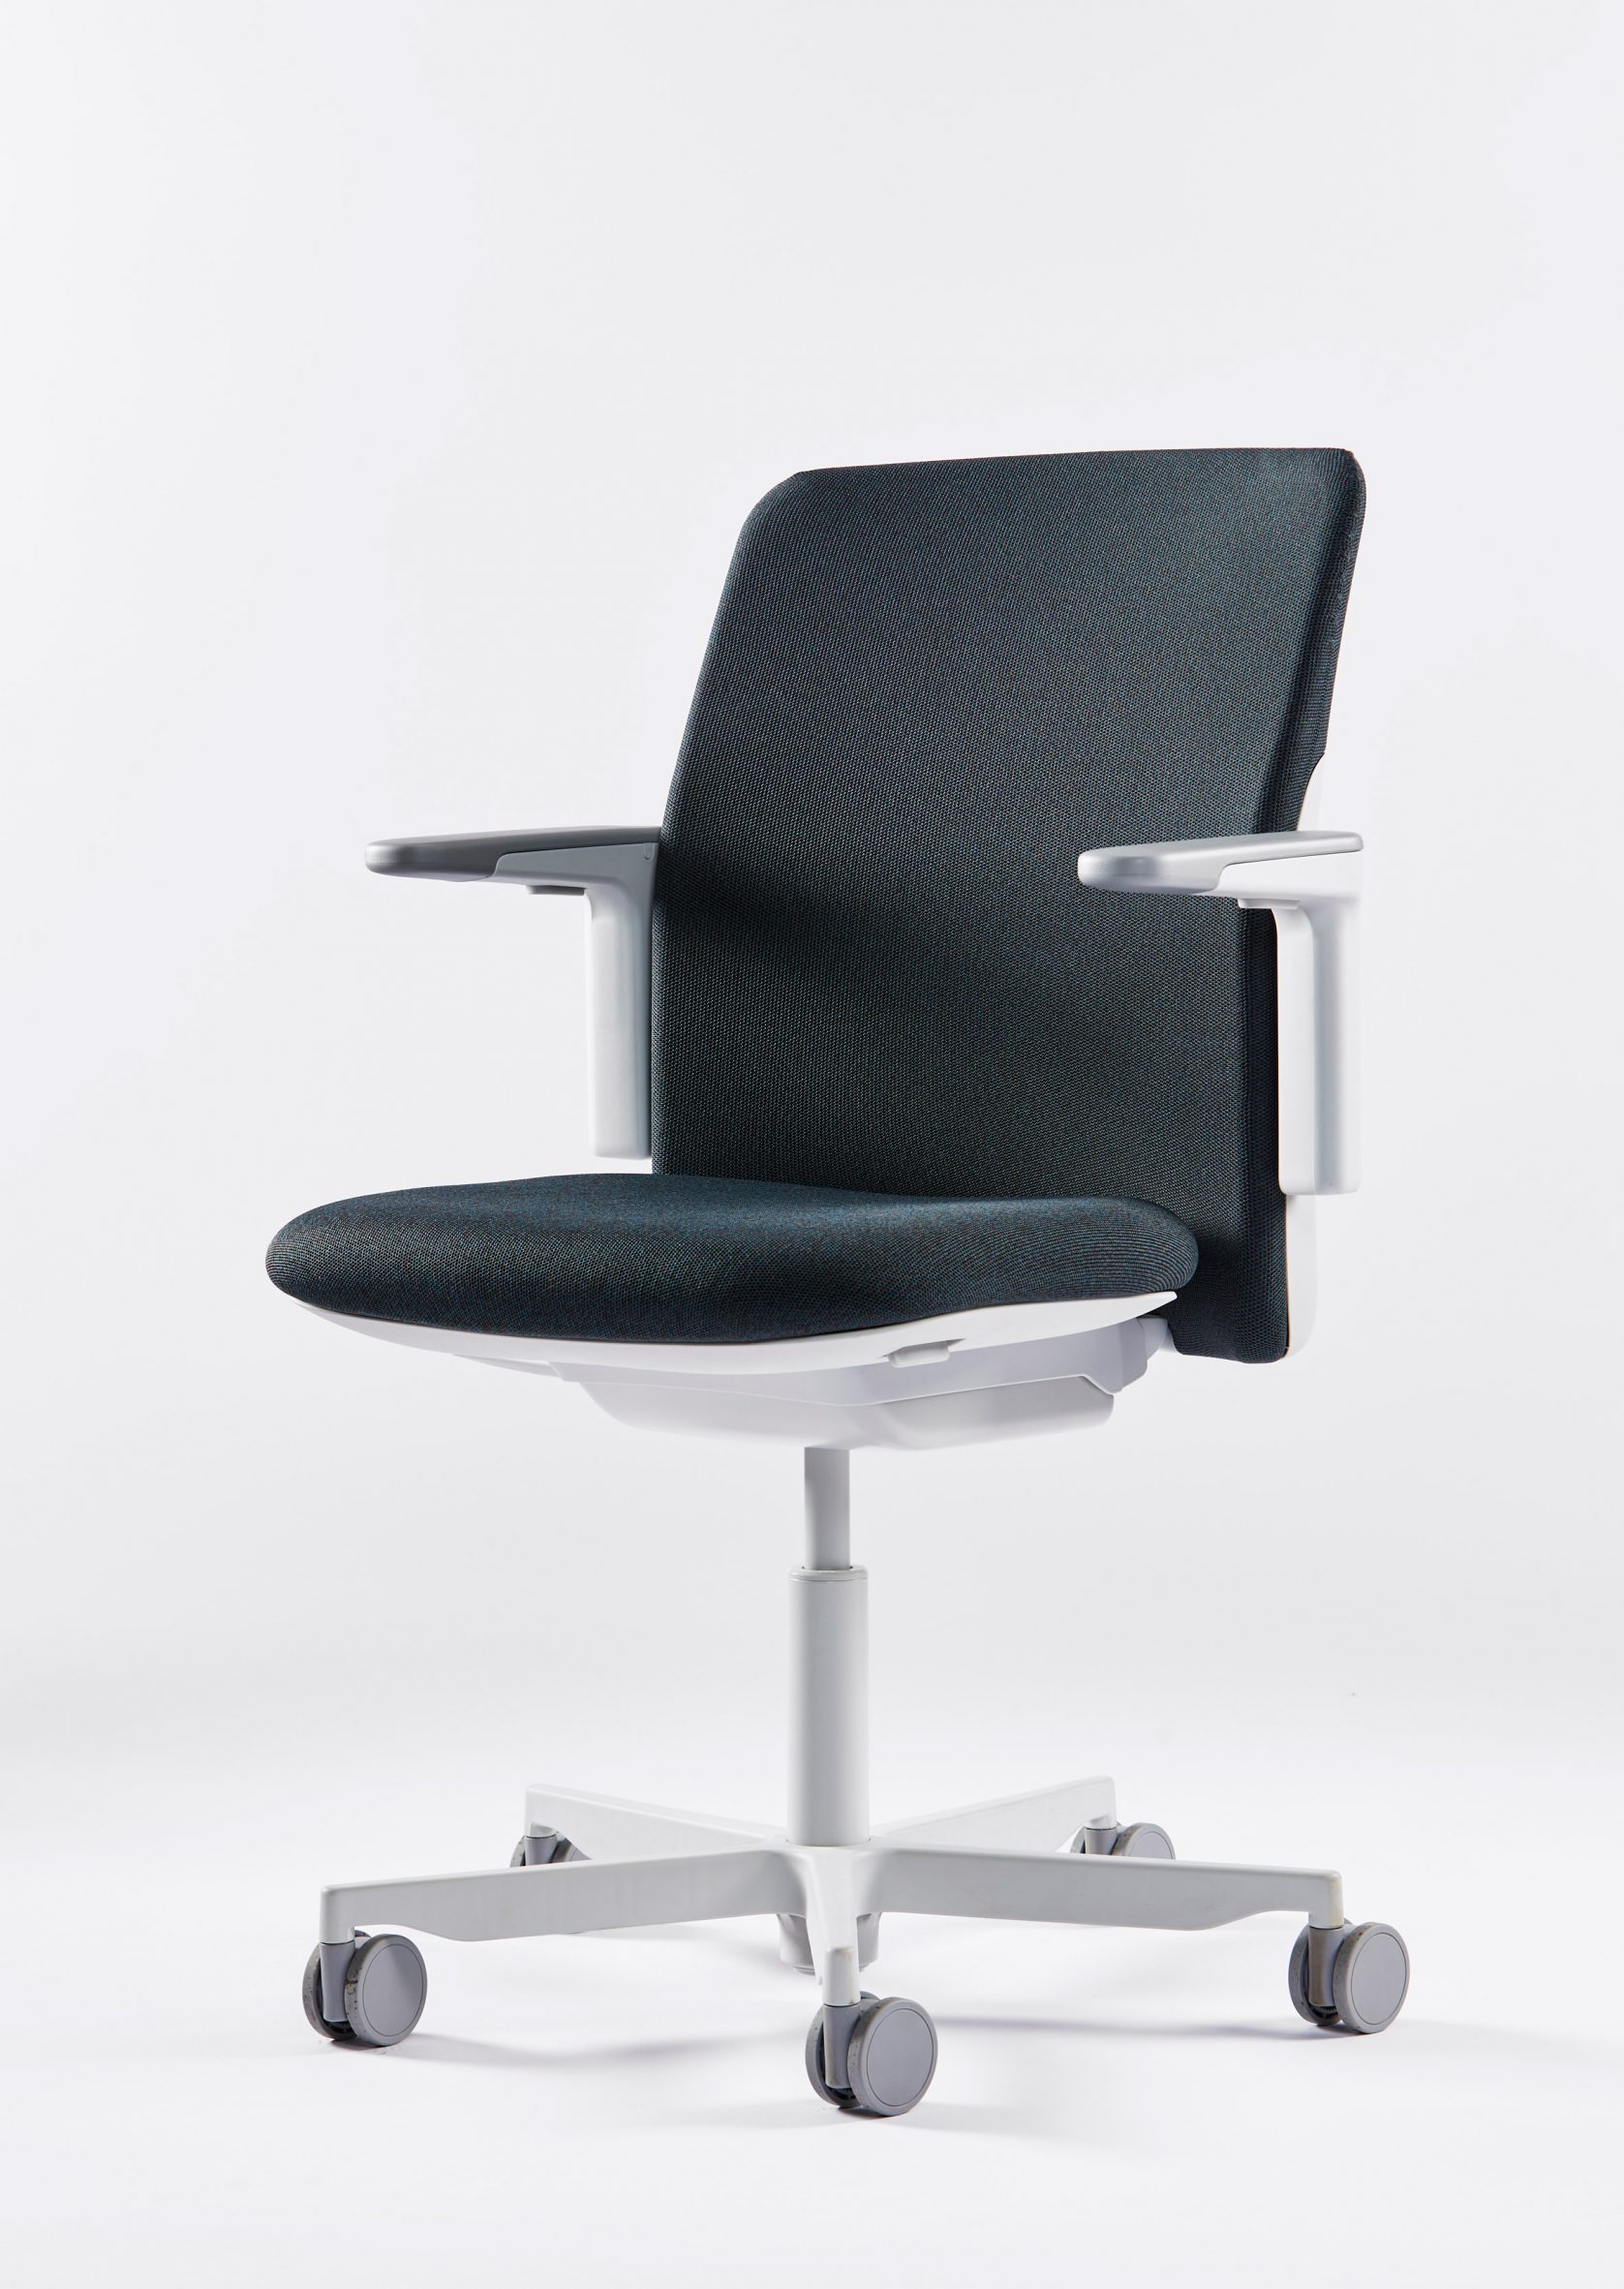 Navy Path office chair by Humanscale